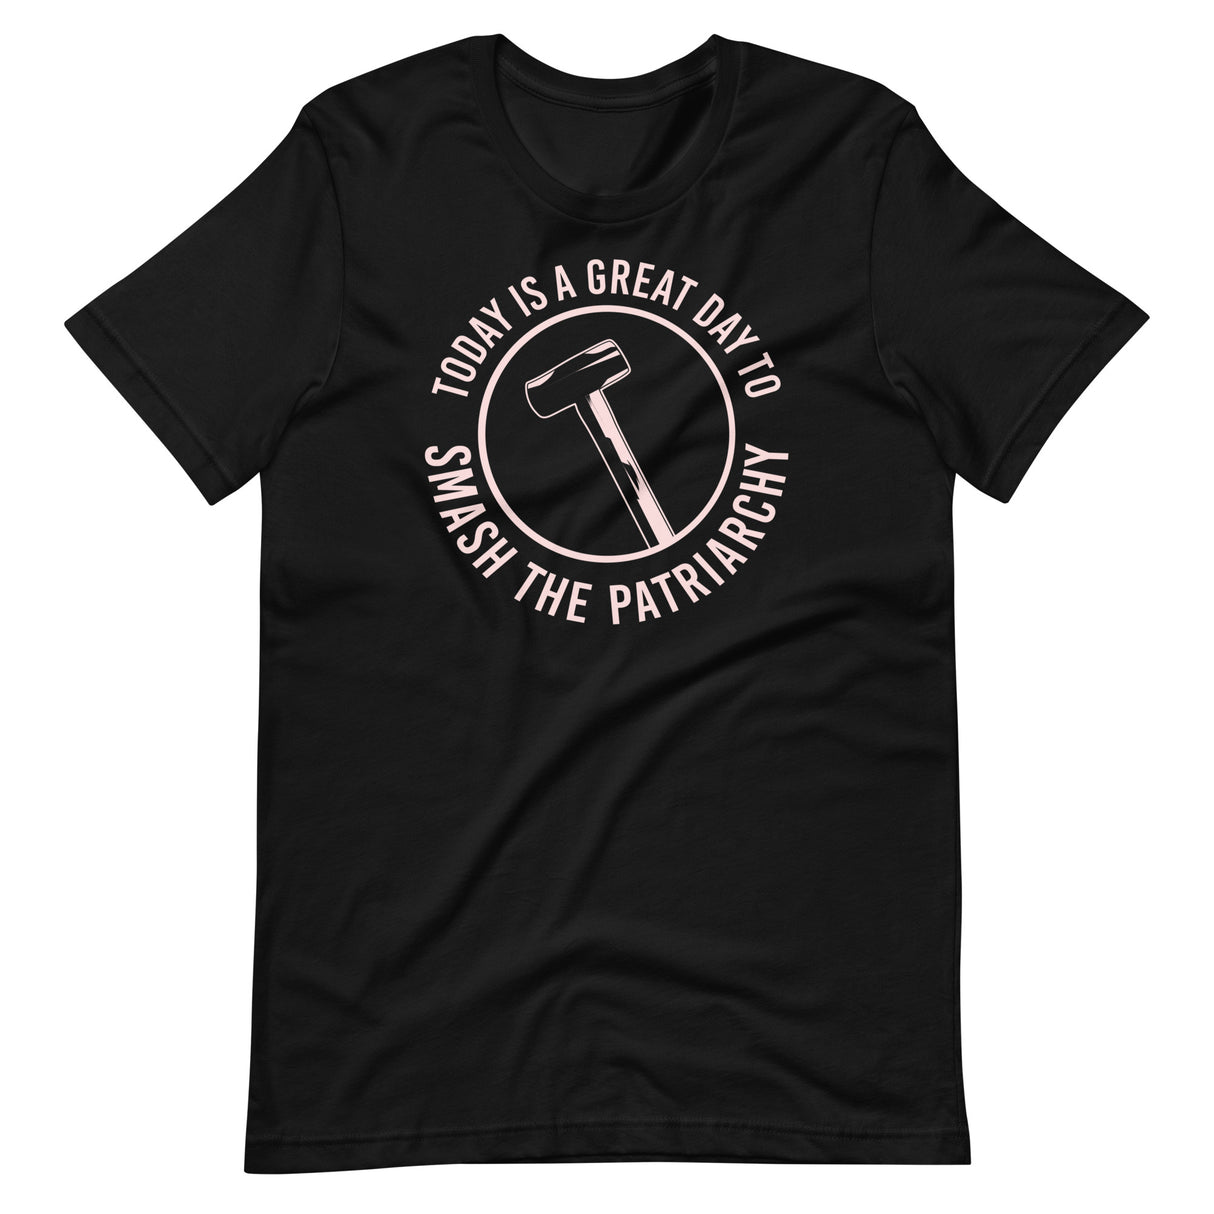 Today is a Great Day To Smash The Patriarchy Shirt